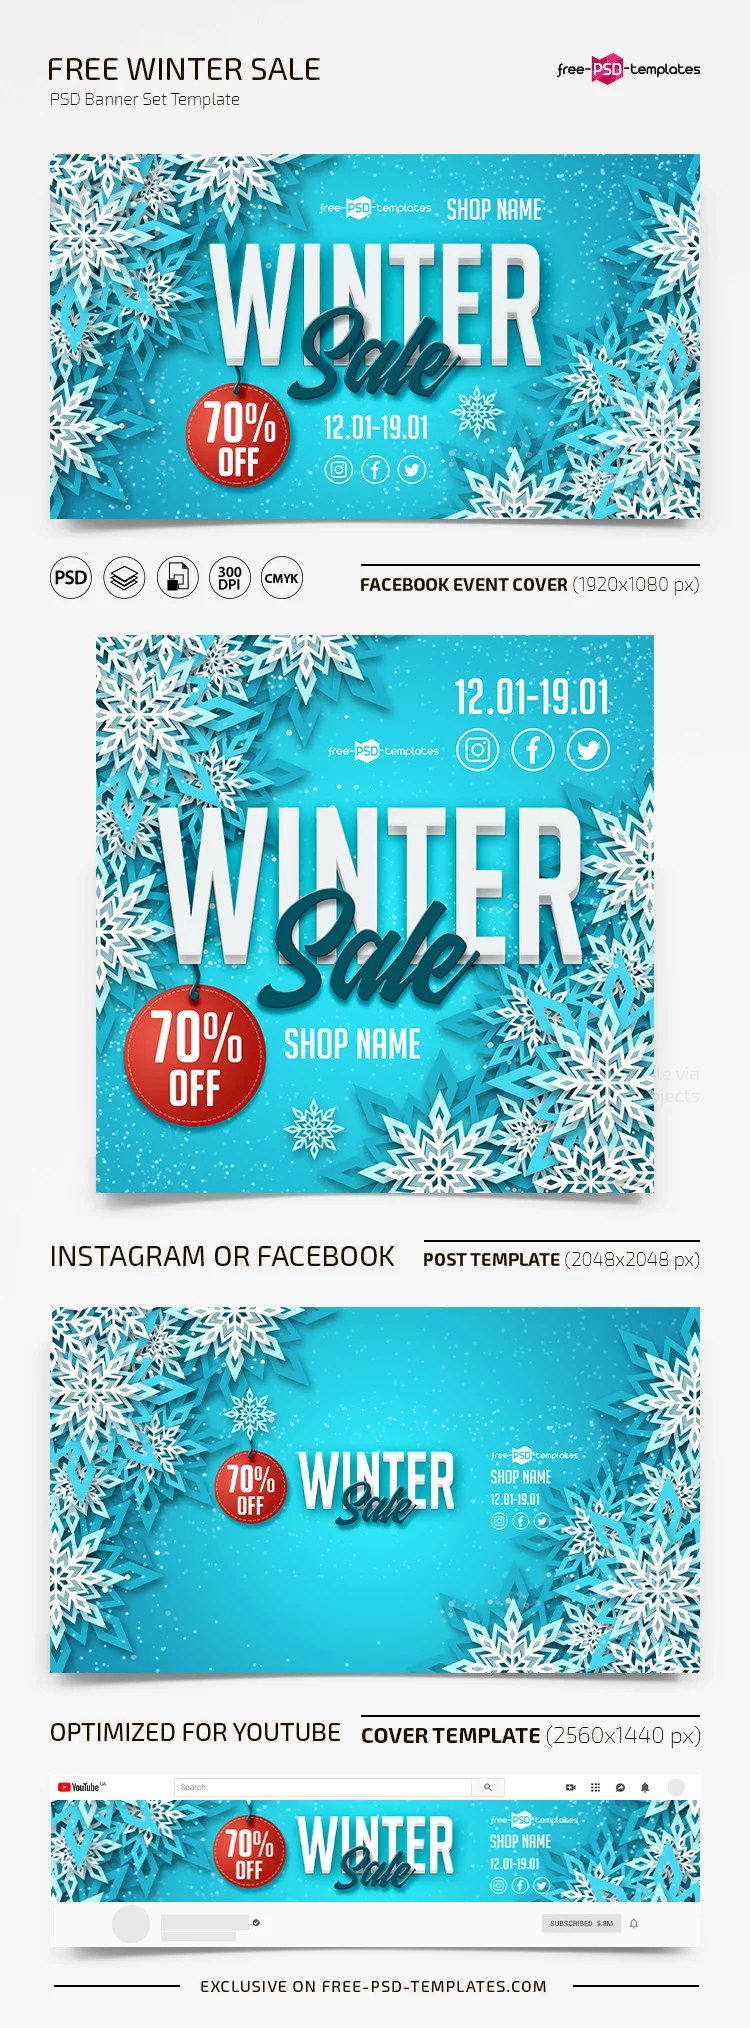 Free Winter Sale Banner Template (PSD)